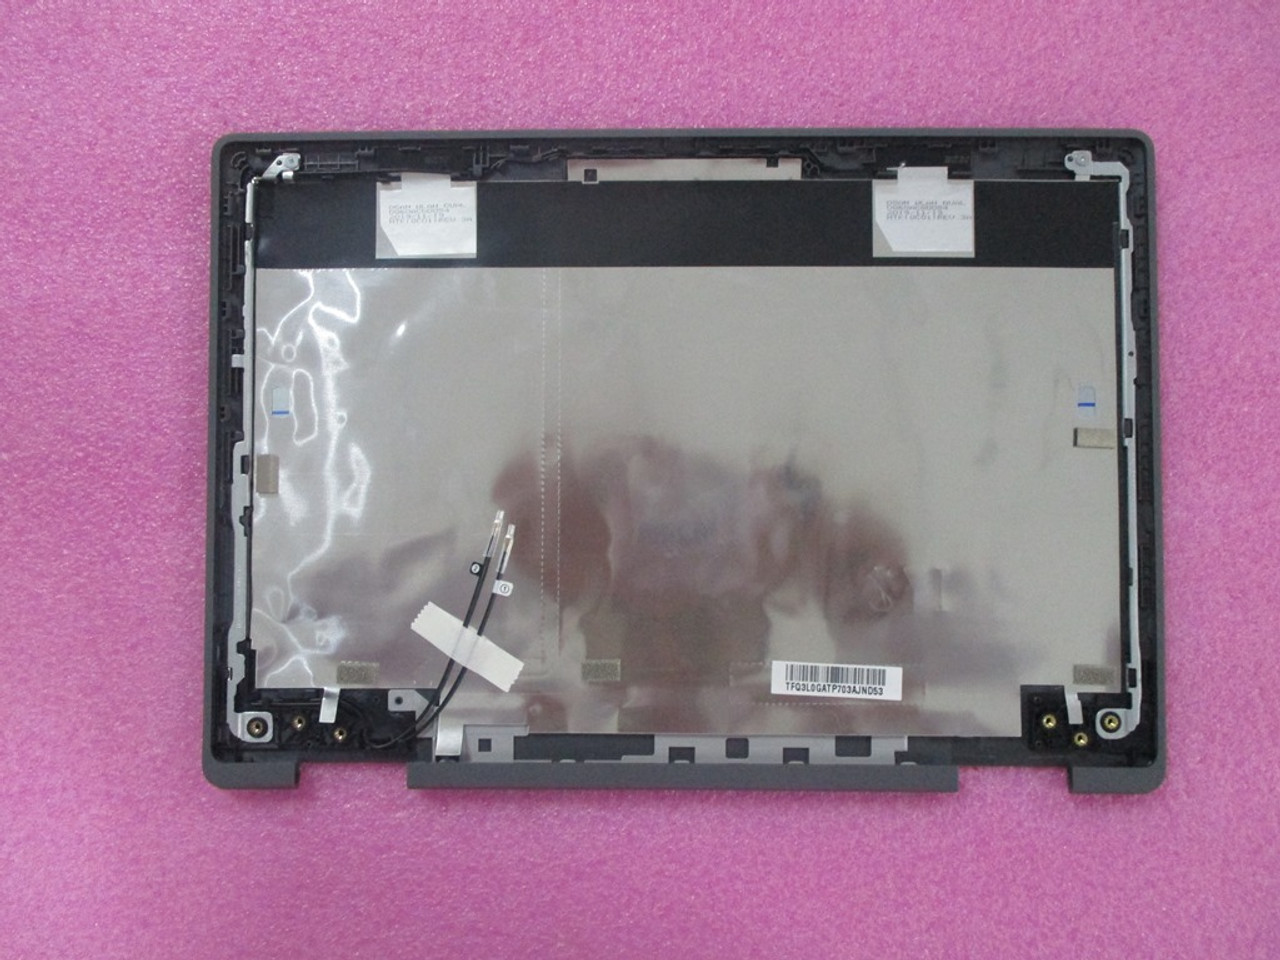 SPS-LCD BACK COVER W/ANTENNA GREY - L92203-001